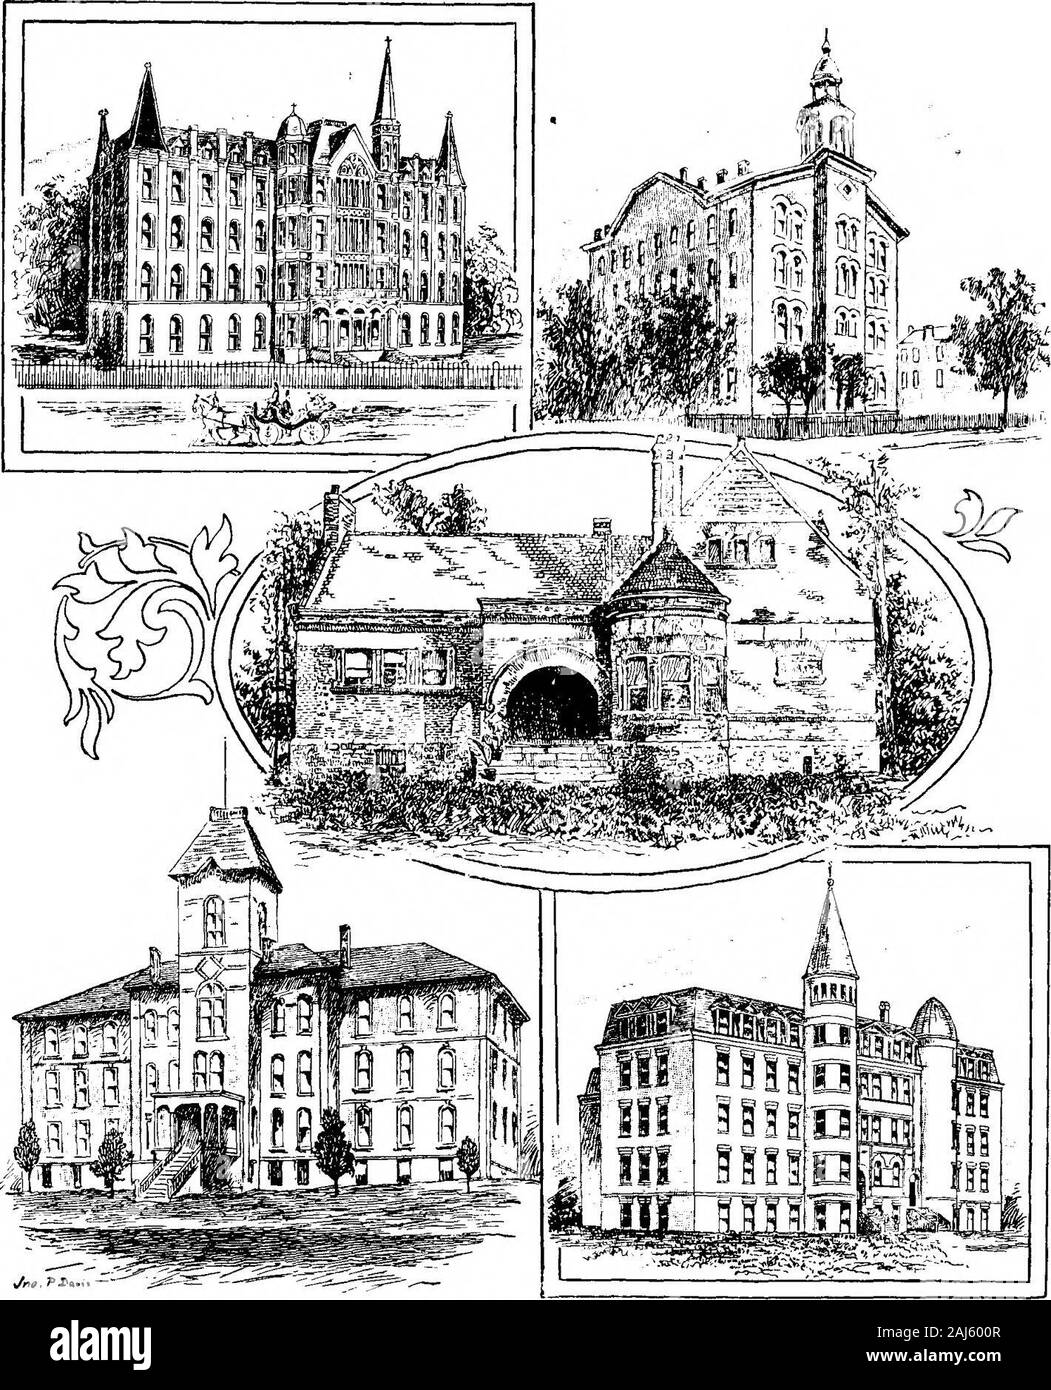 The history of Methodism [electronic resource] . MAIN BUILDING, CLAFLIN UNIVERSITY, ORANGEBURG, S. C primary and elementary departments. The first yearsreceipts were $37,139. After the General Conference of 1872 adopted the societya few eligible points for training schools were selected and realestate purchased. At first the teachers were all white per-sons, many of them from the North ; but immediate arrange-ments were made for raising up a corps of teachers fromamong the colored people themselves. The receipts from Growth of the Work 1101. Jm&gt;,PI&gt;*.i SOUTHERN EDUCATIONAL BUILDINGS. New Stock Photo